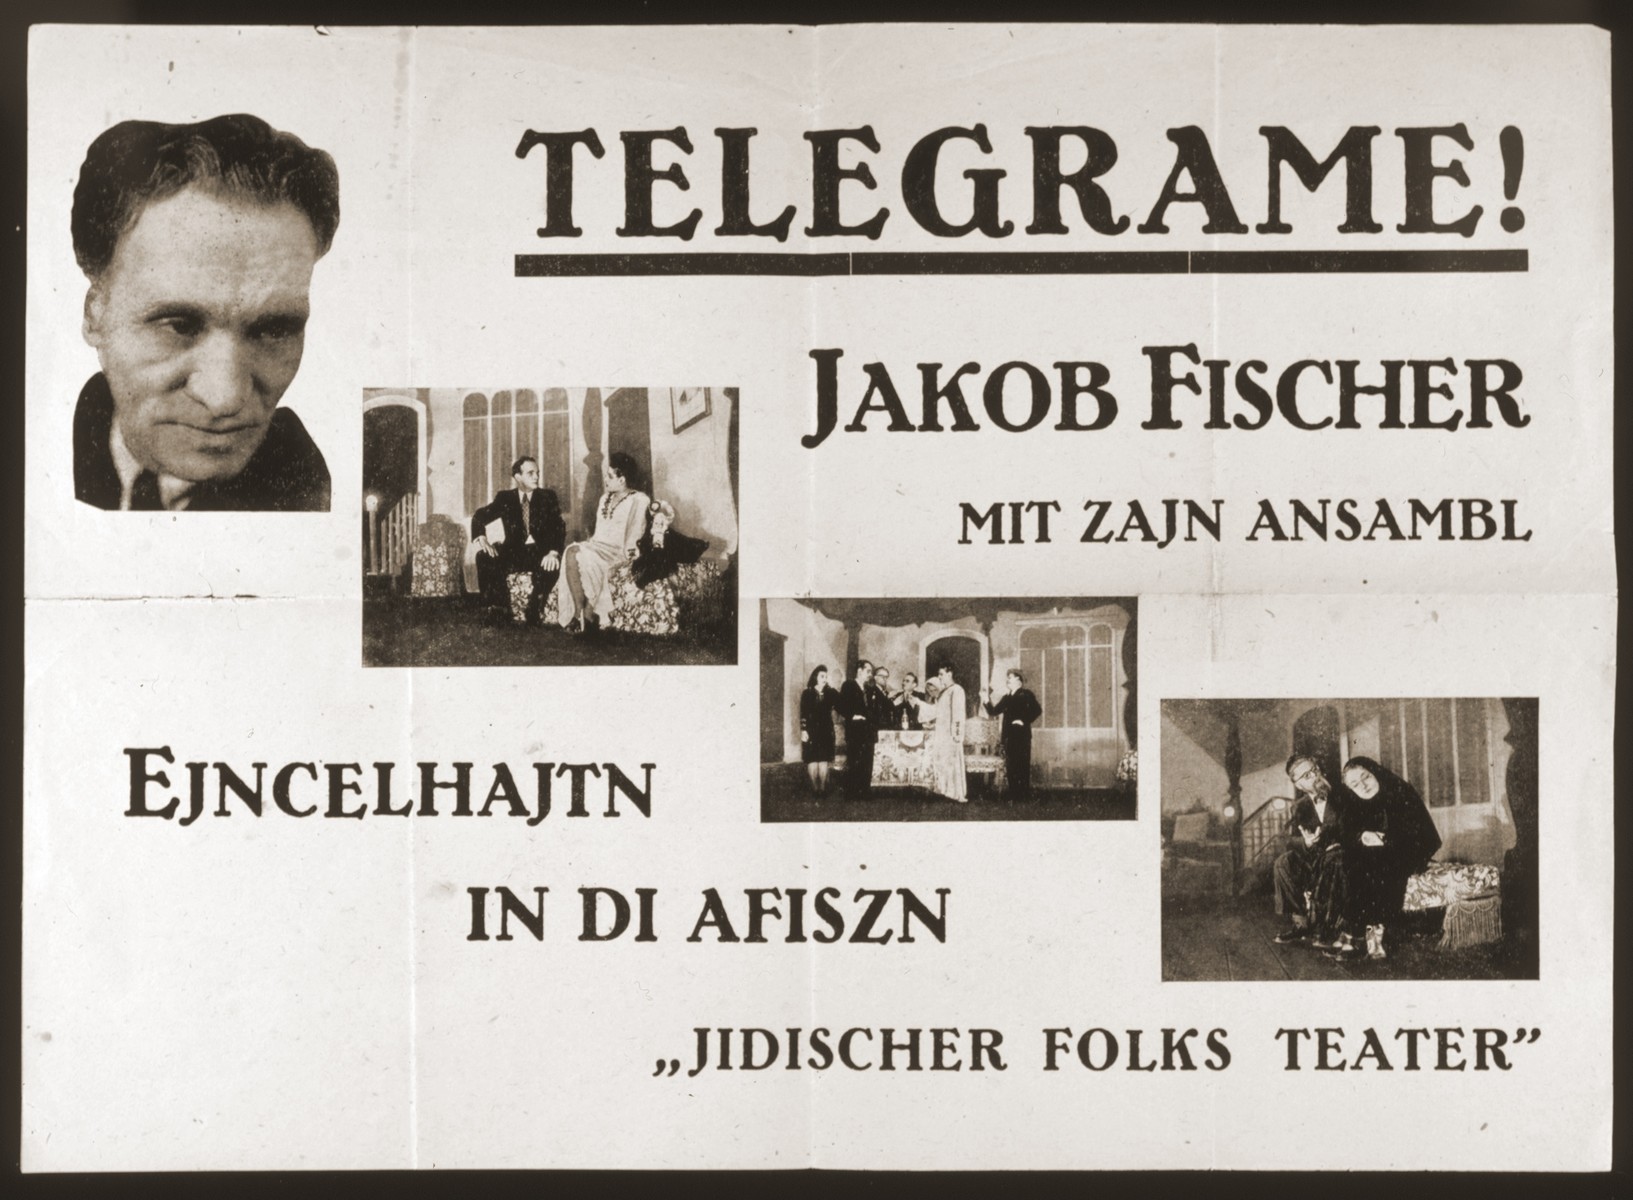 Poster advertising the play "Telegrame!" at the Jidischer Folks Teater.  The production stars Jakob Fischer and his ensemble.

Theatrical troupes revived the works of the prewar Yiddish stage during the postwar DP period from 1945-1951.